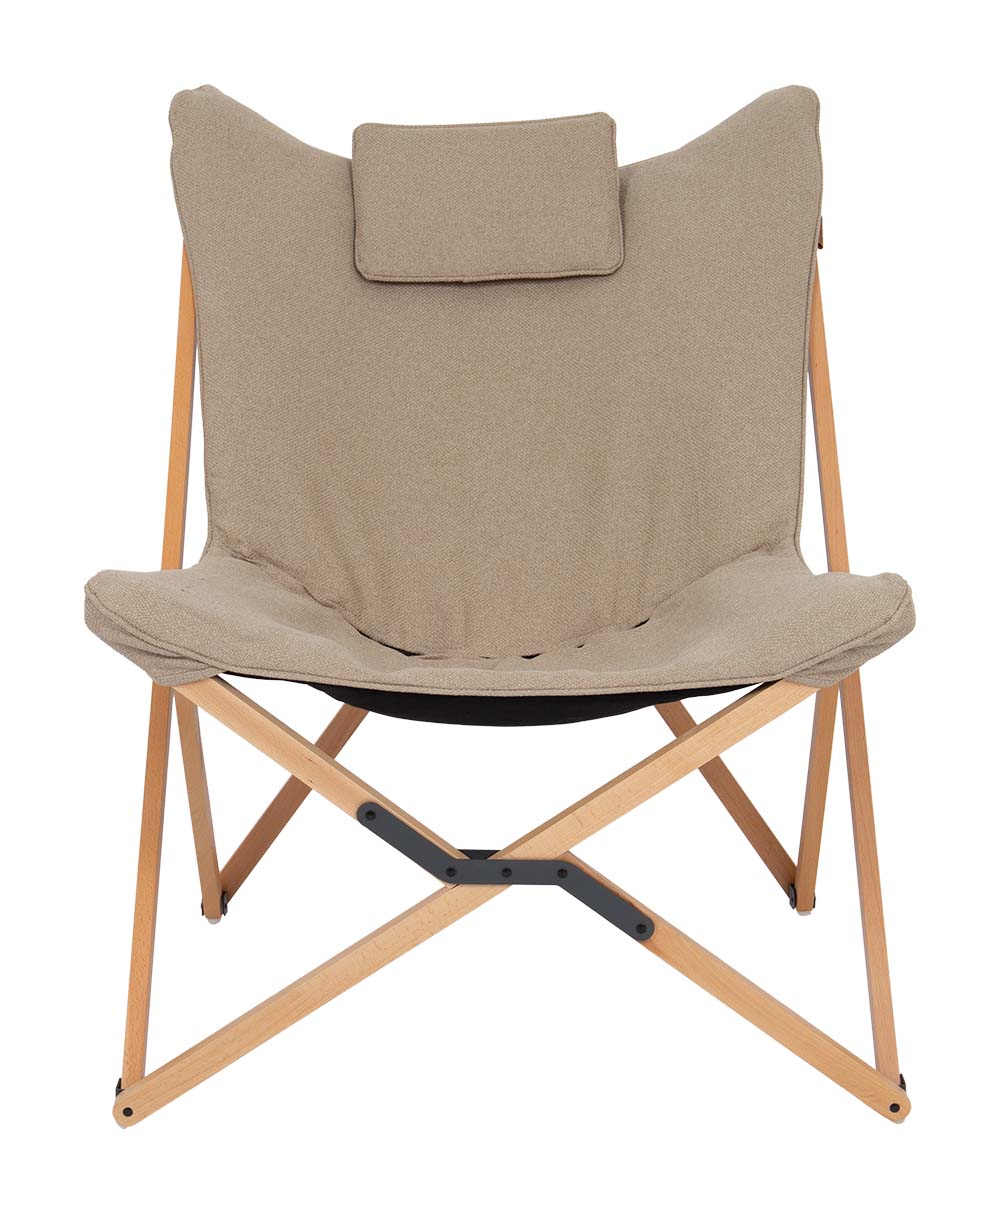 Bo-Camp - Urban Outdoor collection - Relaxstoel - Wembley - L - Nika - Beige detail 2